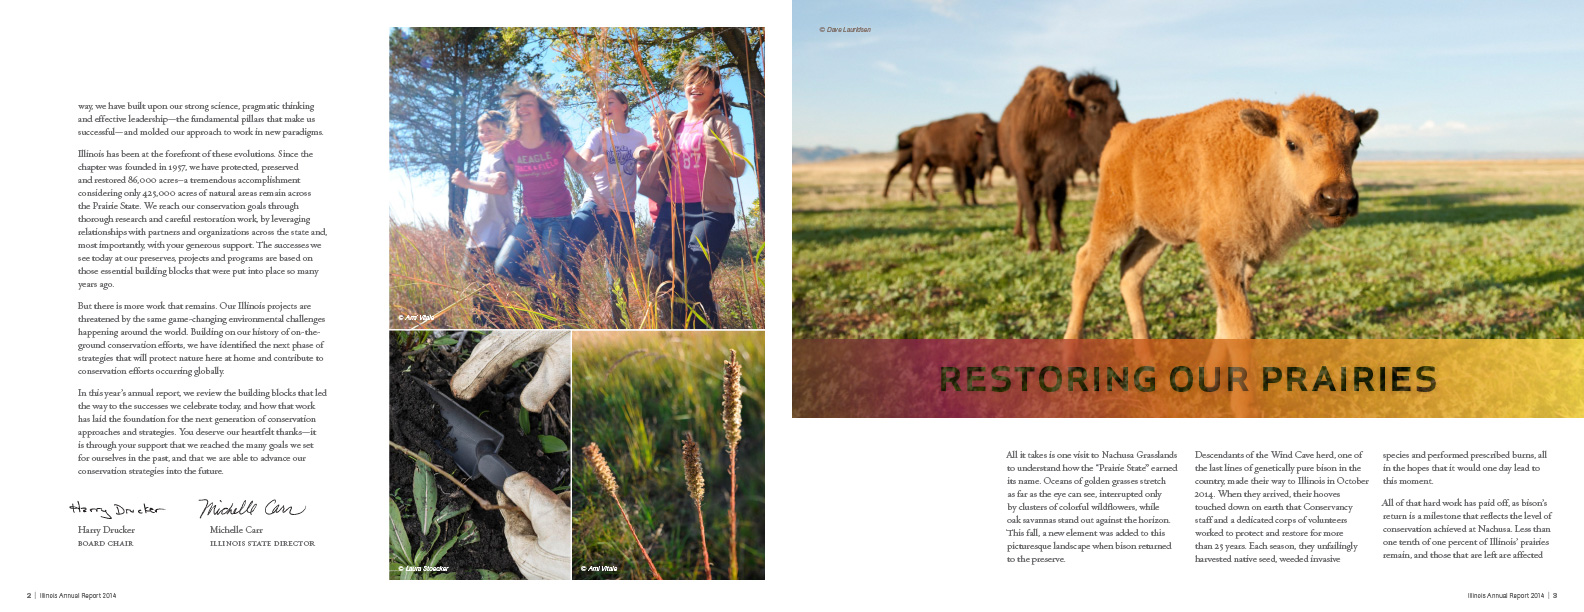 Third spread from the 2015 annual report